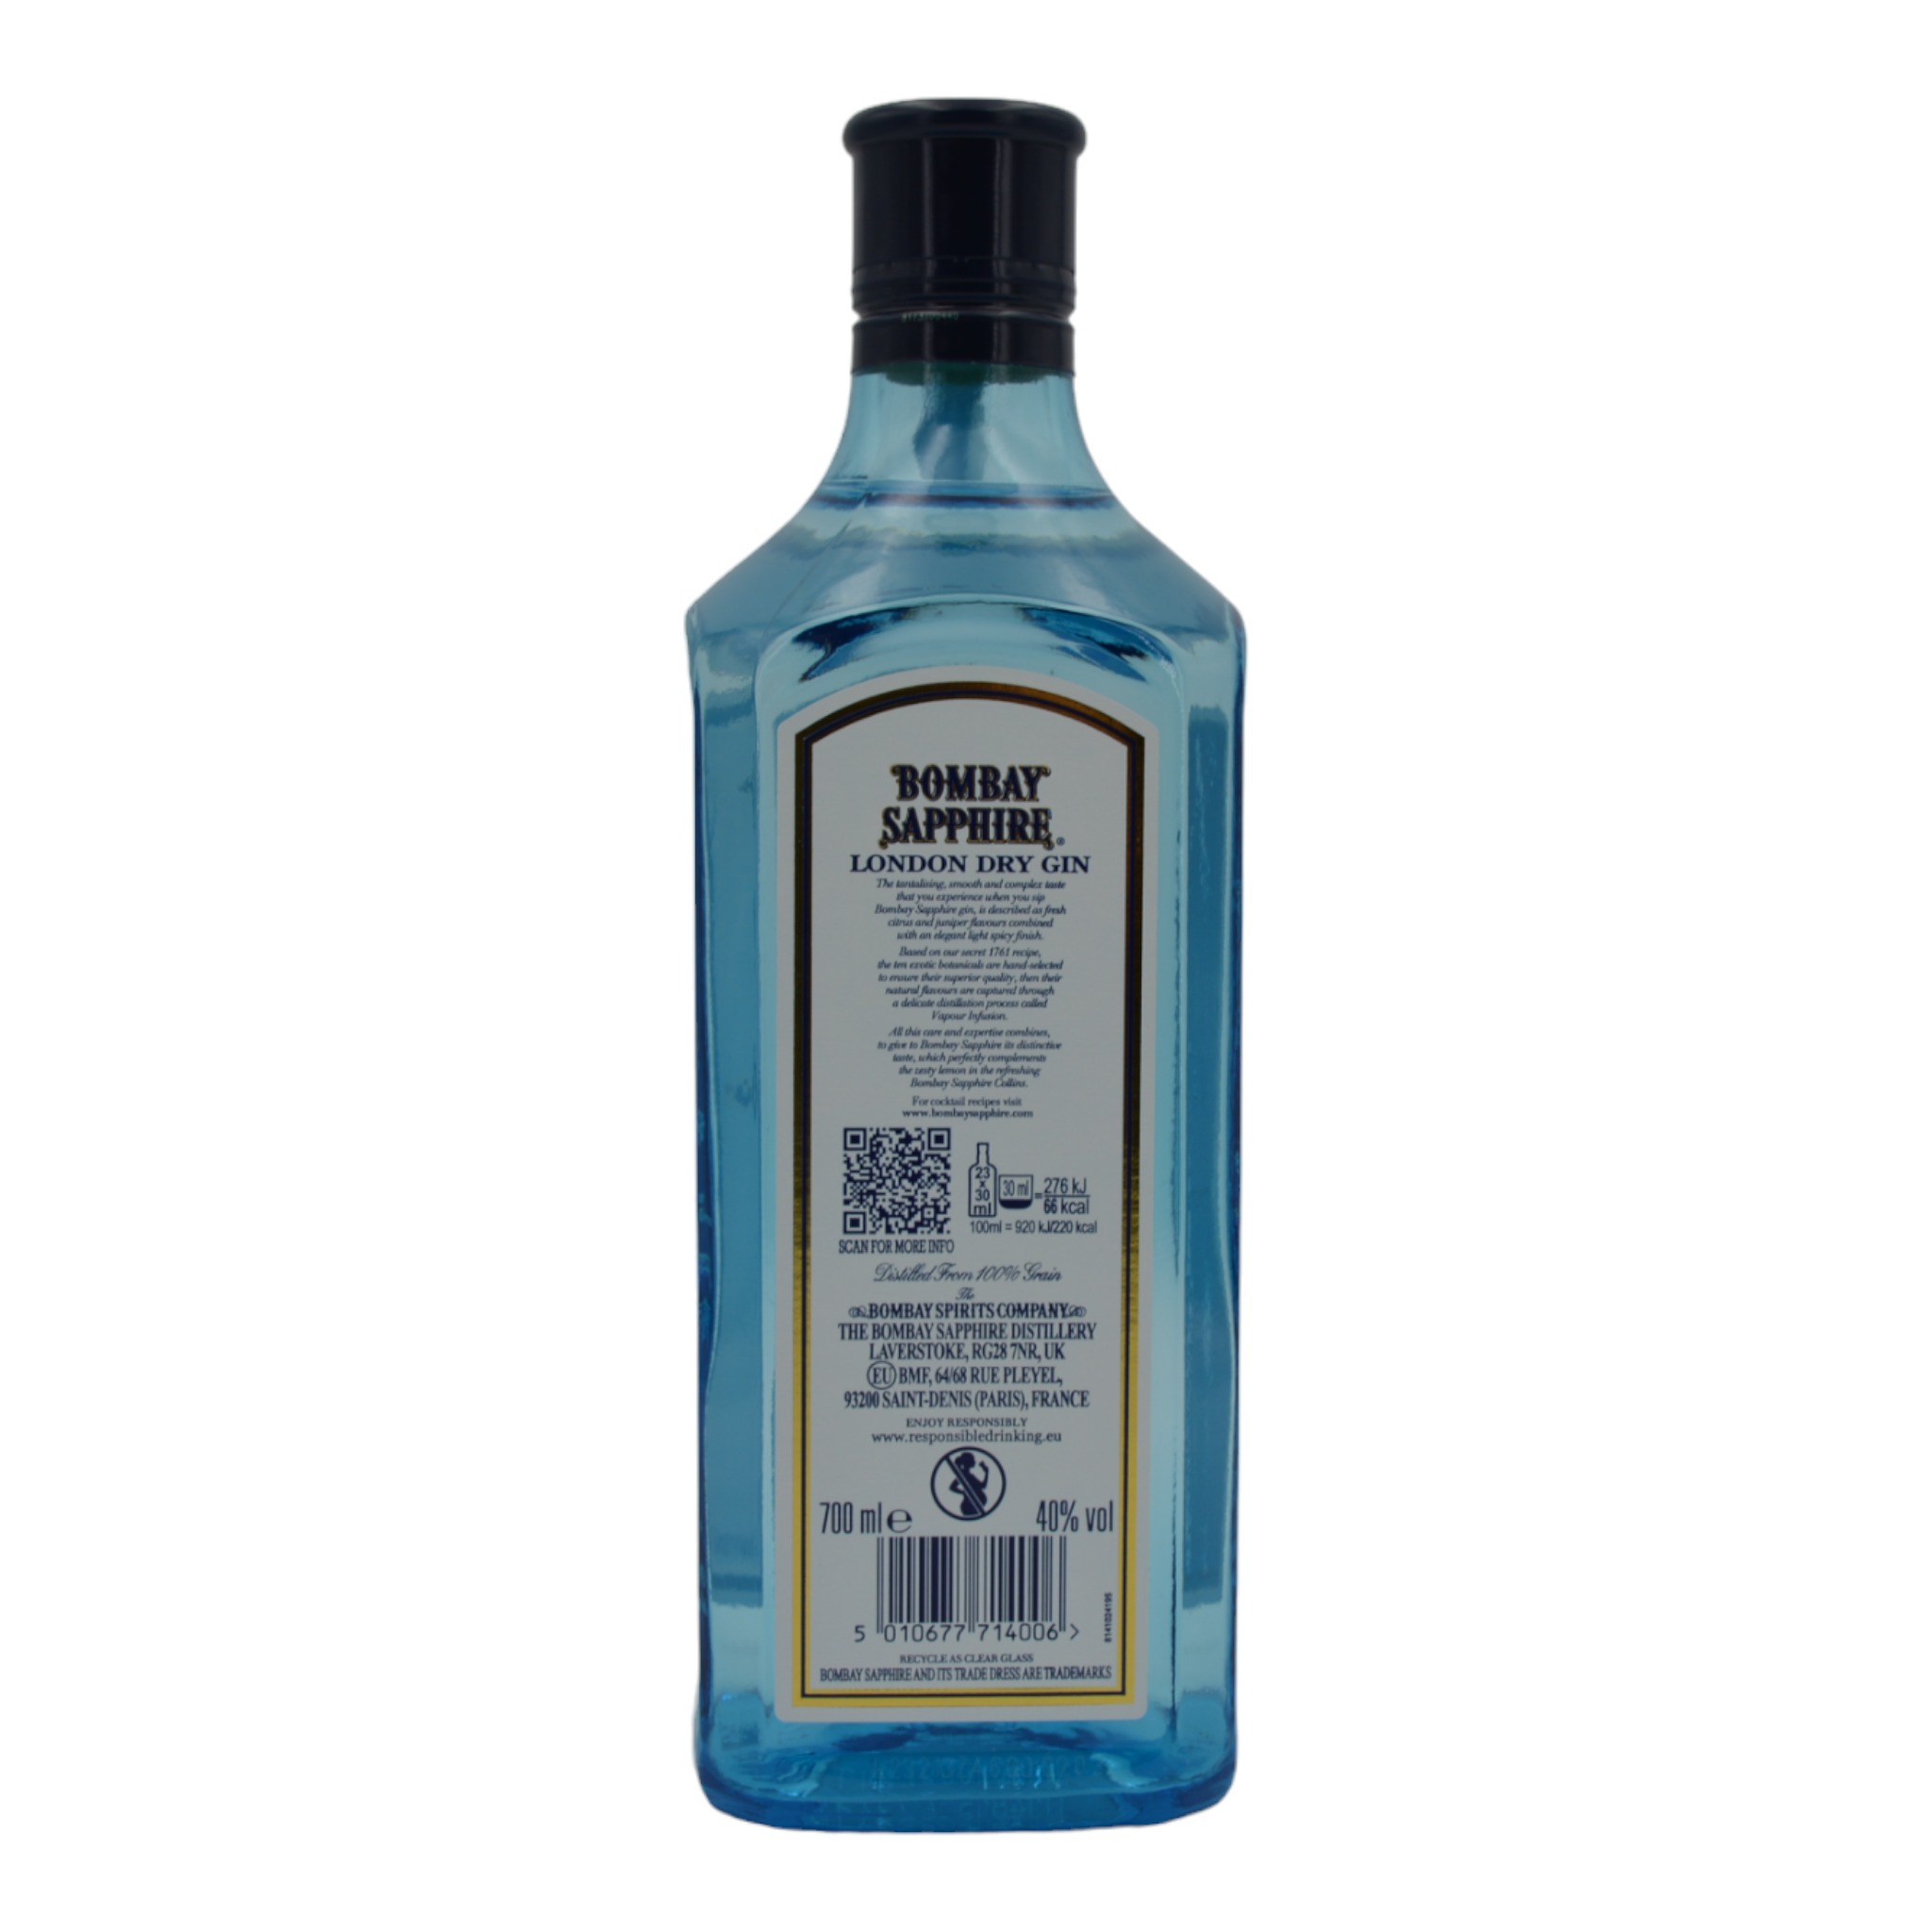 5010677714006Bombay Sapphire London Dry Gin Vapour infused b - Weinhaus-Buecker